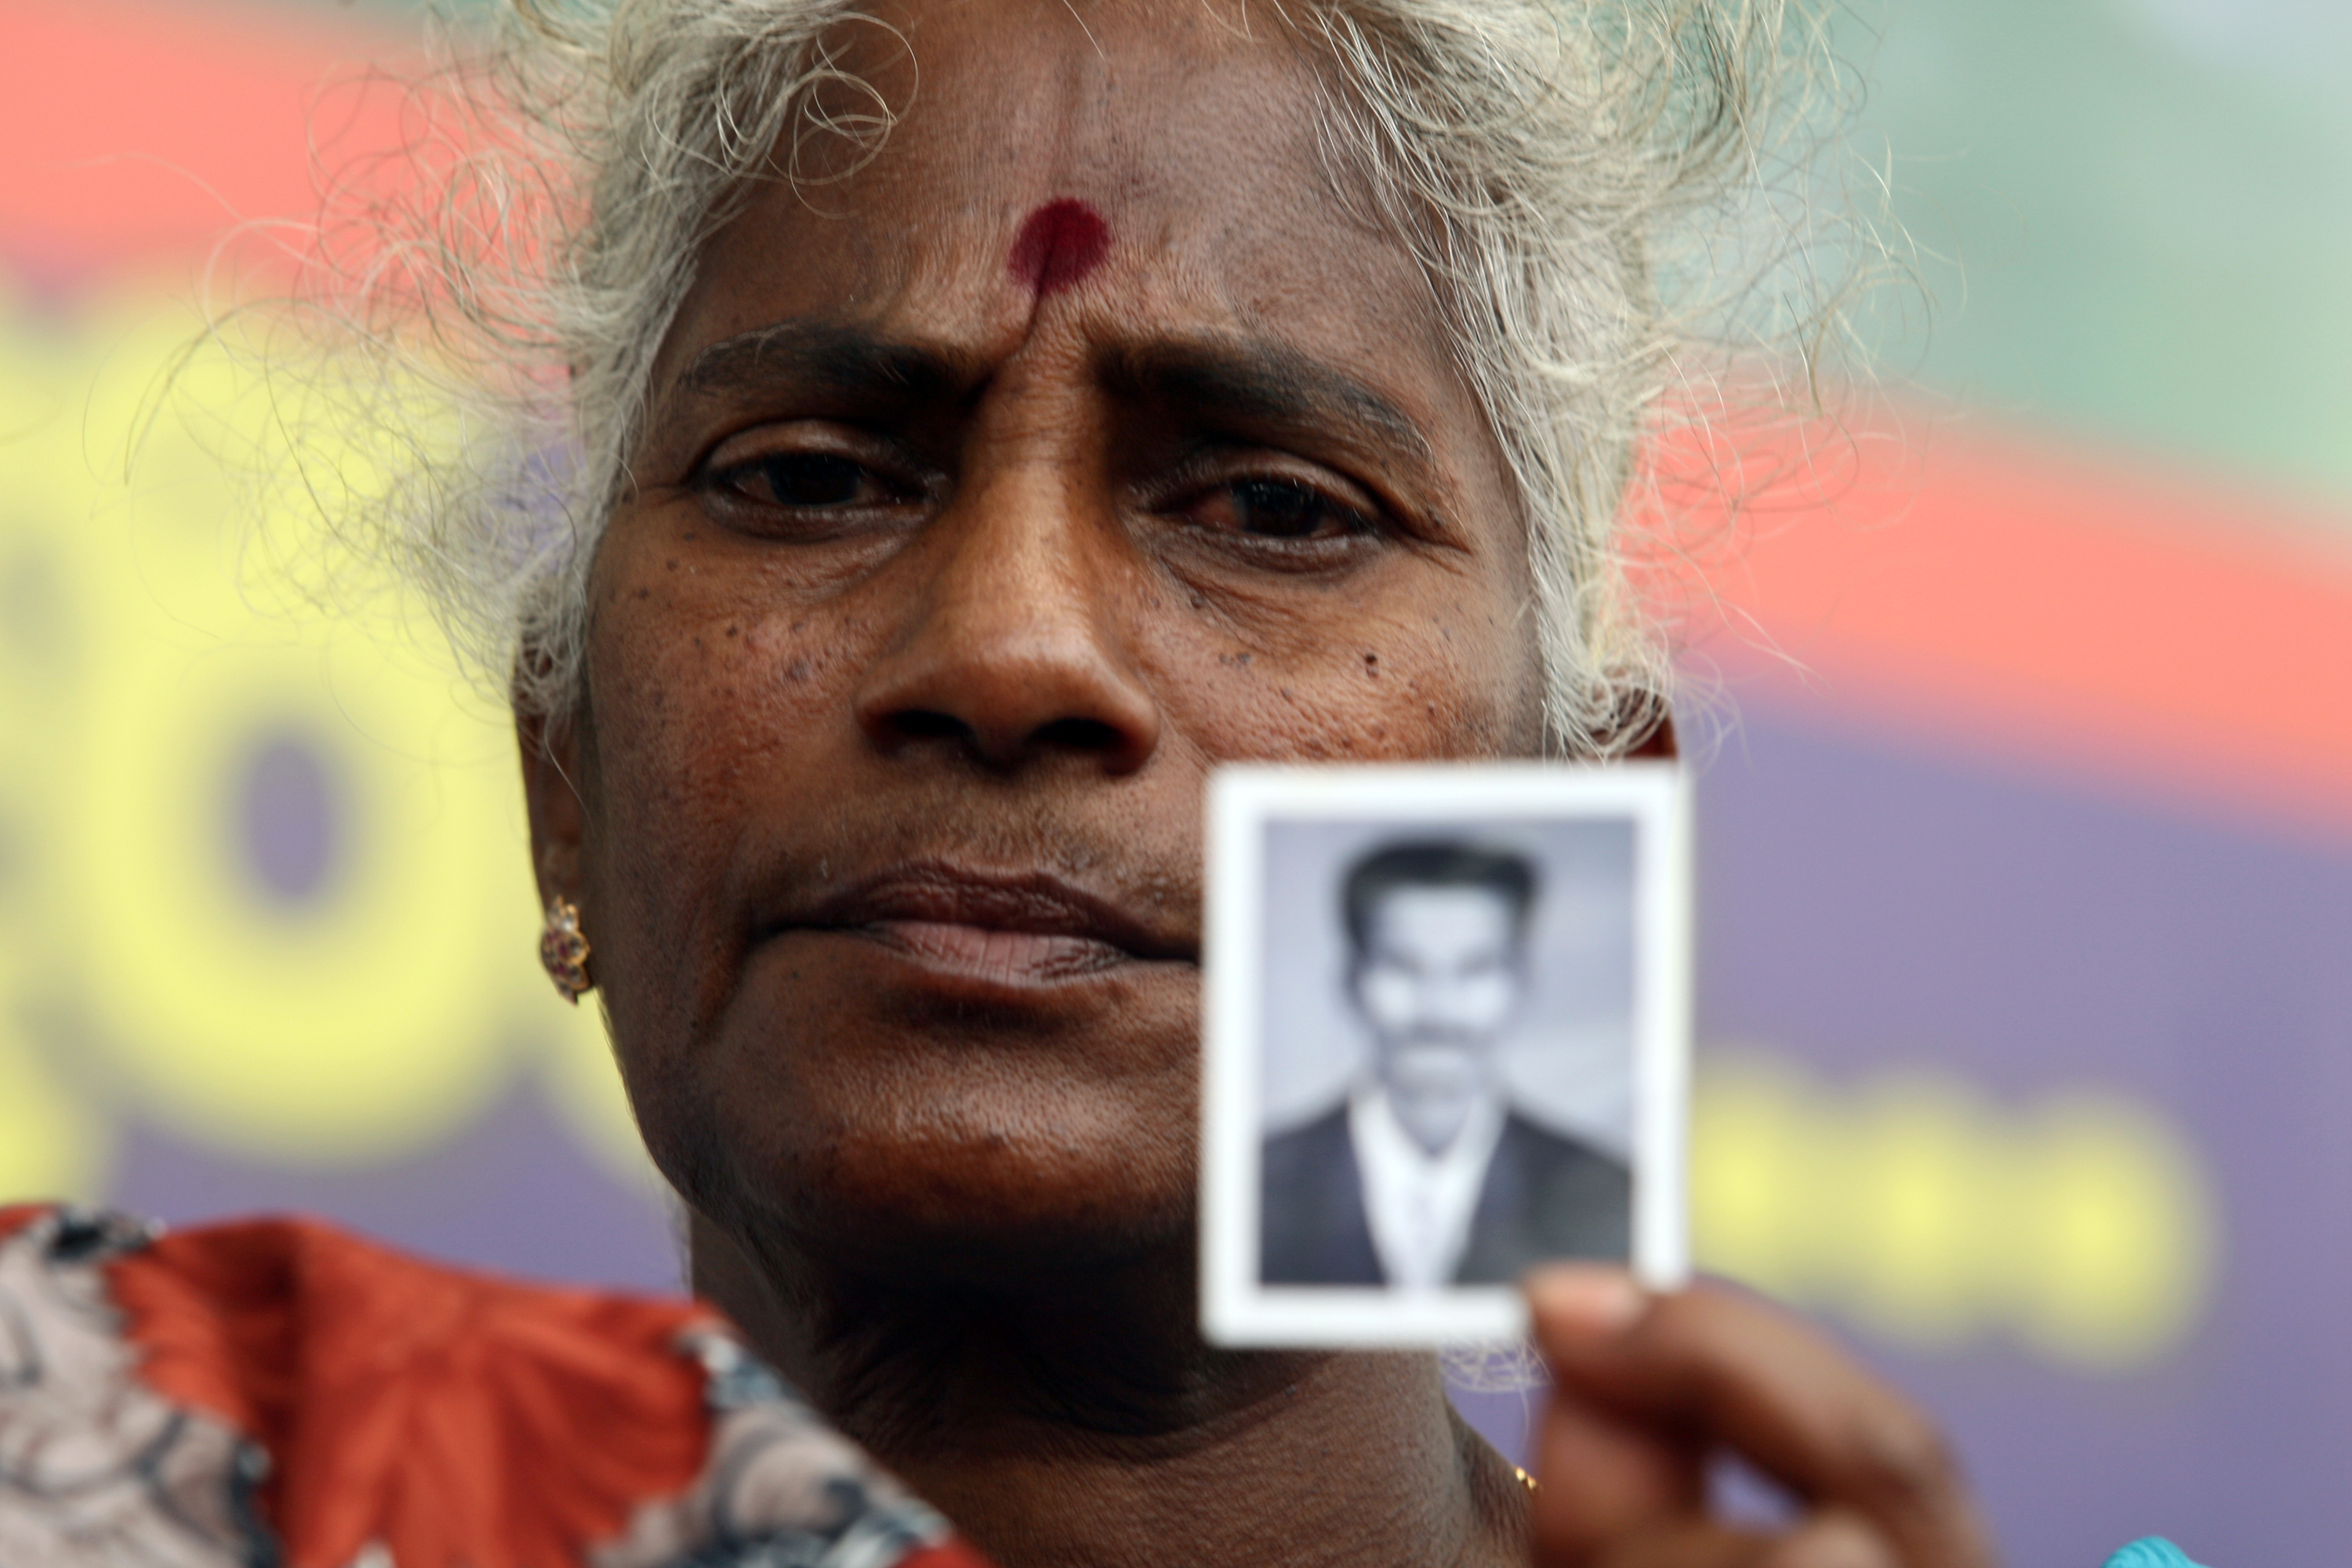 Senevirathnam Wasanayagi, 63, mother of a detained Tamil Tiger rebel suspect holds up a photo of her son during a protest outside the main prison on May 29, 2012, in Colombo, Sri Lanka. Relatives and rights activists are demanding that the Tamil Tiger rebel suspects who have been held without trial  are released or brought to court (Buddhika Weerasinghe—Getty Images)